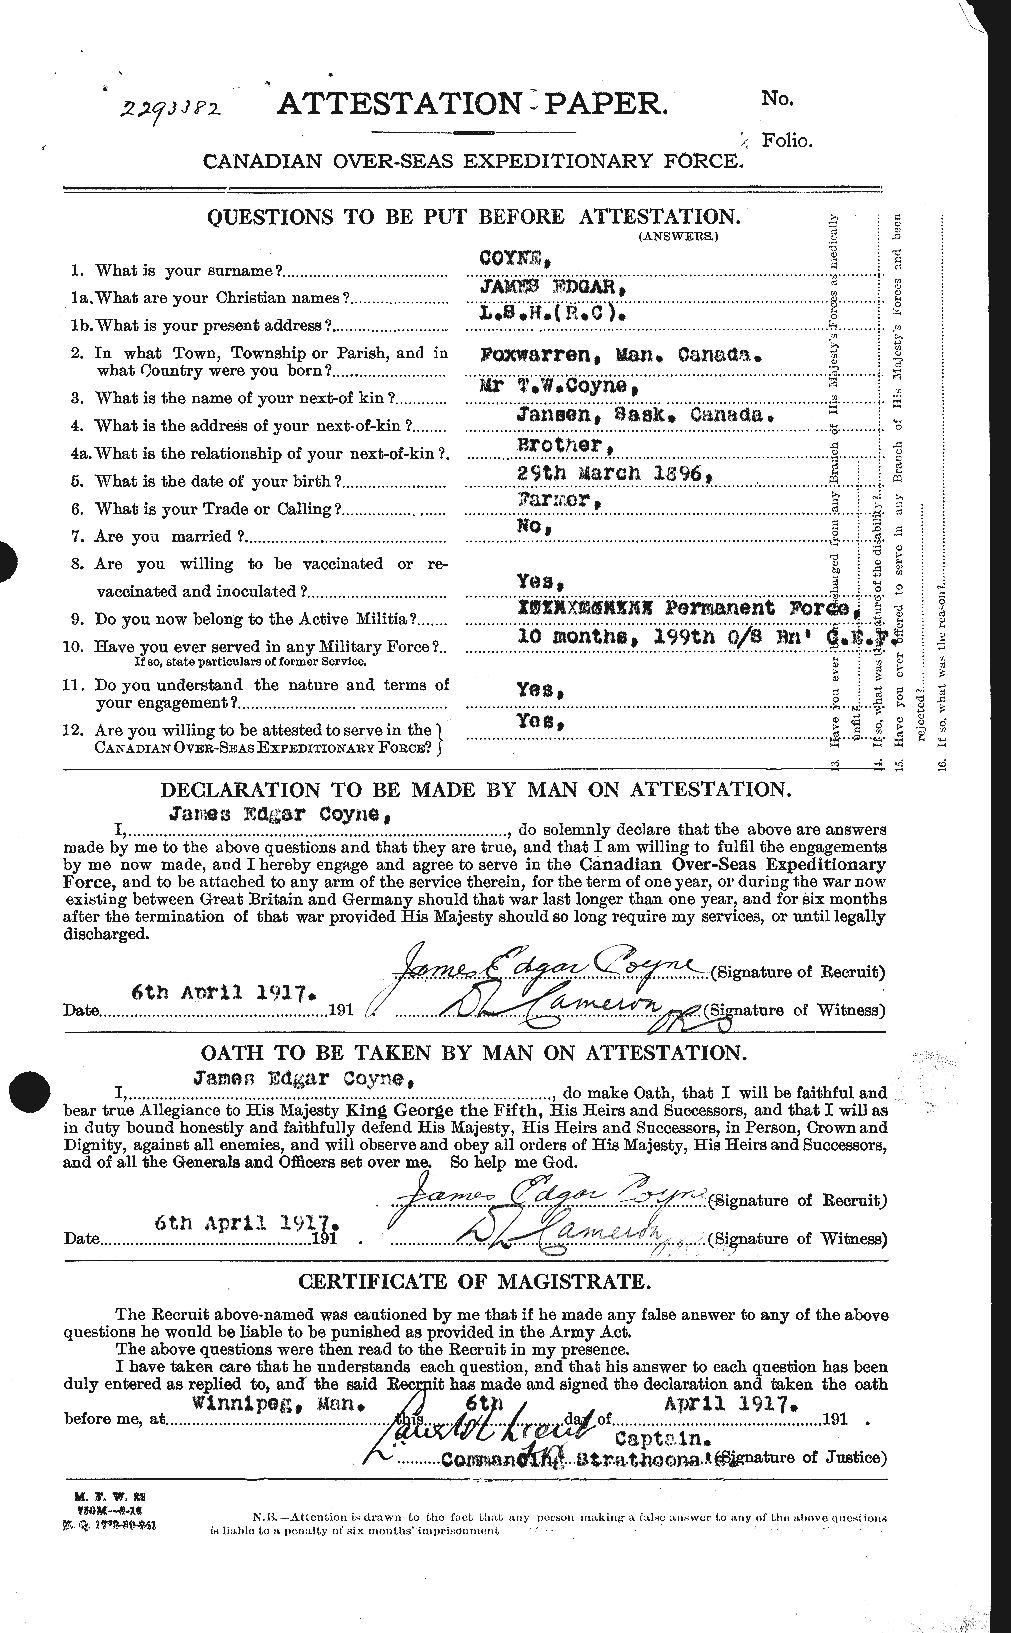 Personnel Records of the First World War - CEF 062322a